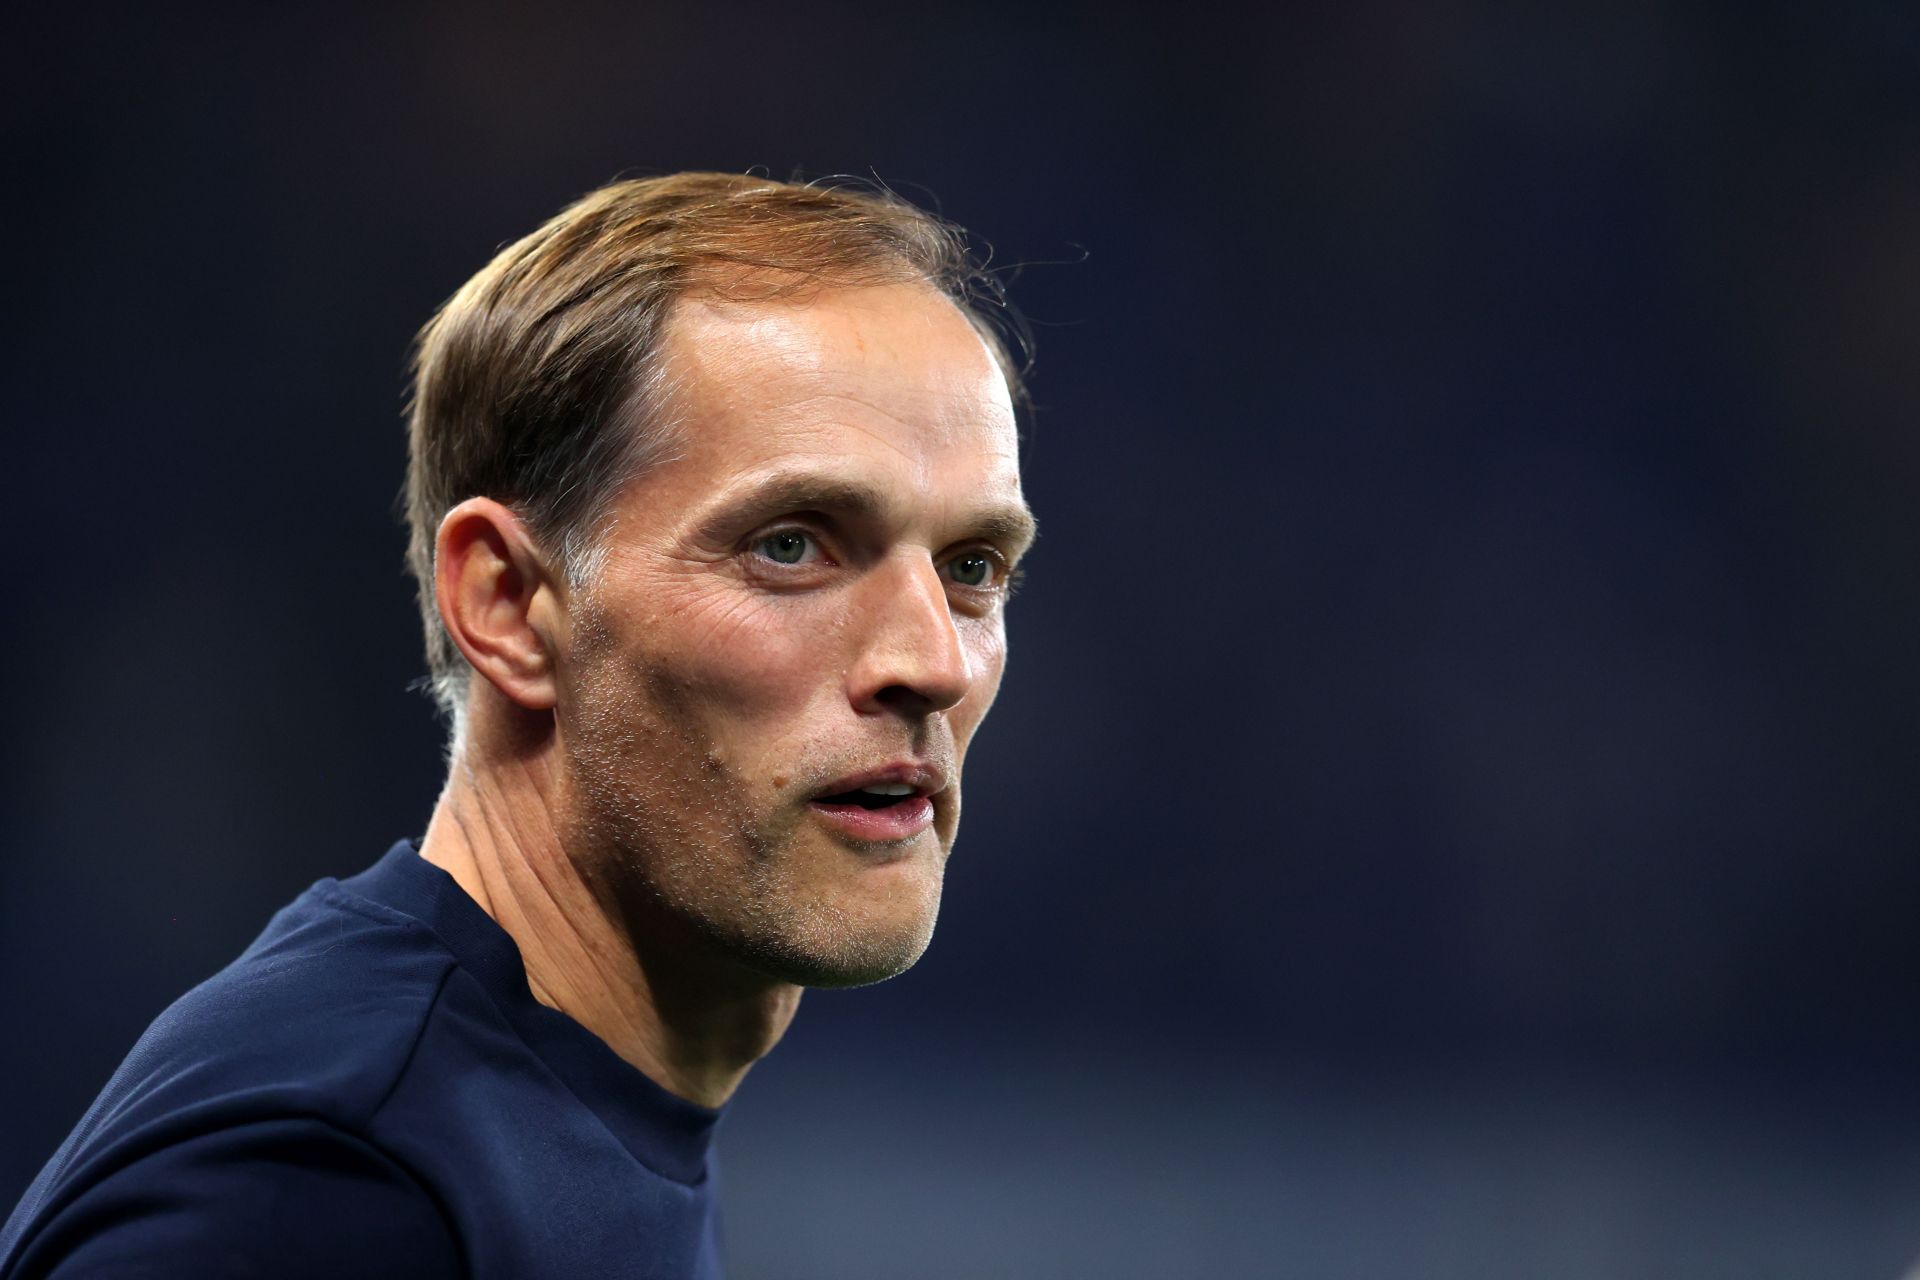 Chelsea manager Thomas Tuchel has seen his side slip up in recent games.